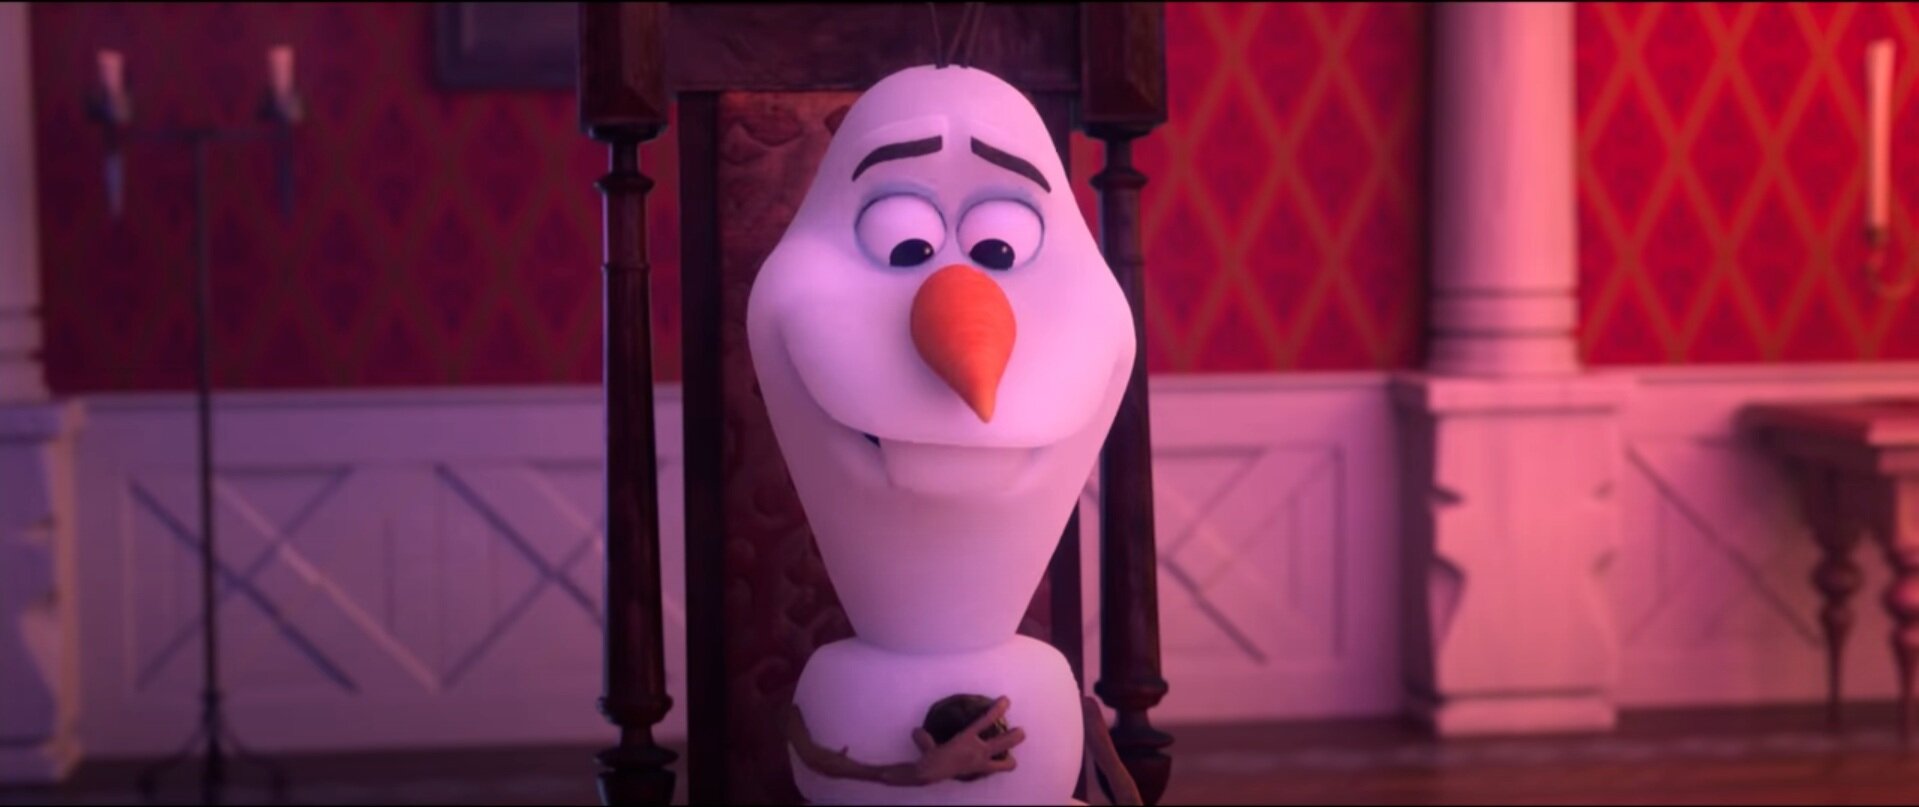 AT HOME WITH OLAF Presents 'I Am With You,' a Sweet Song Featuring ...